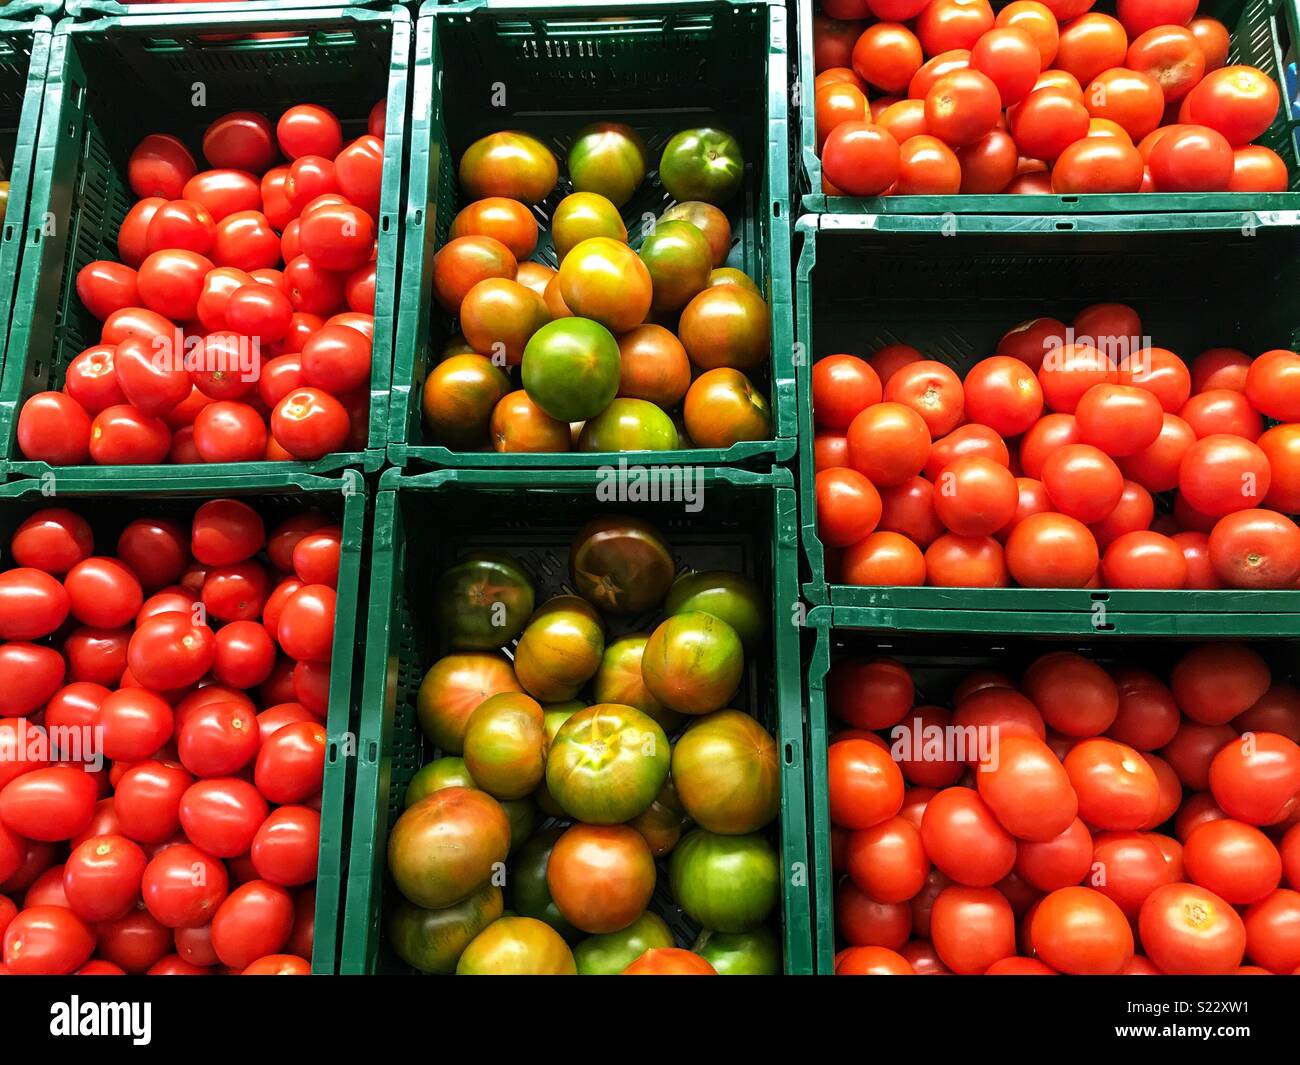 Assortment of different types of tomatoes displayed in crates in a supermarket, Spain Stock Photo